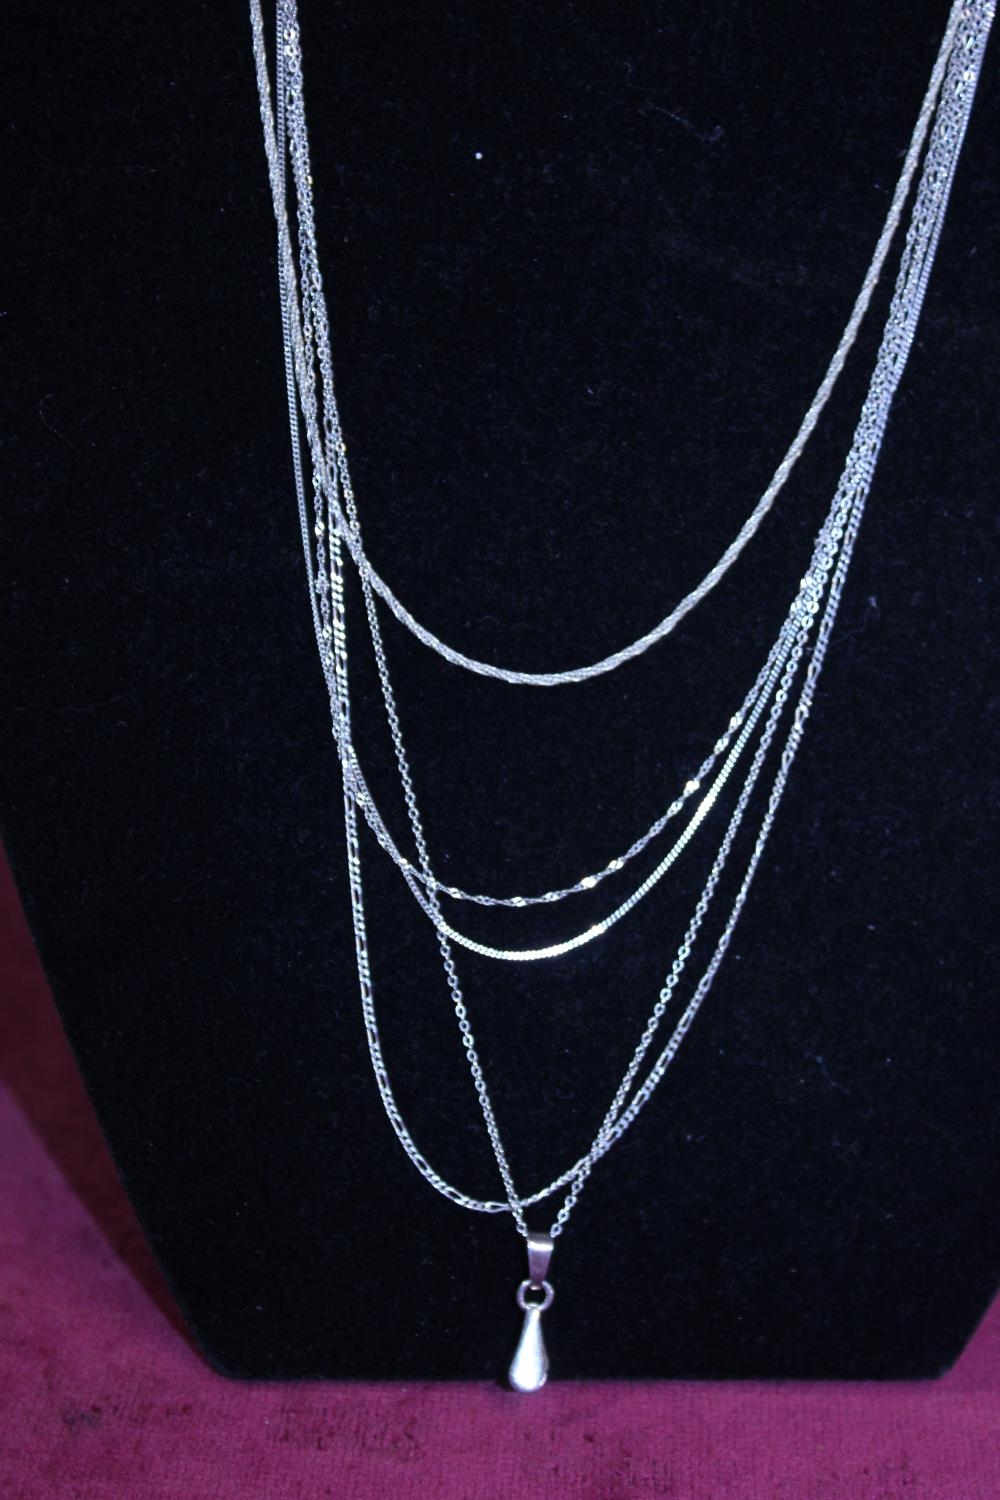 A selection of silver chains